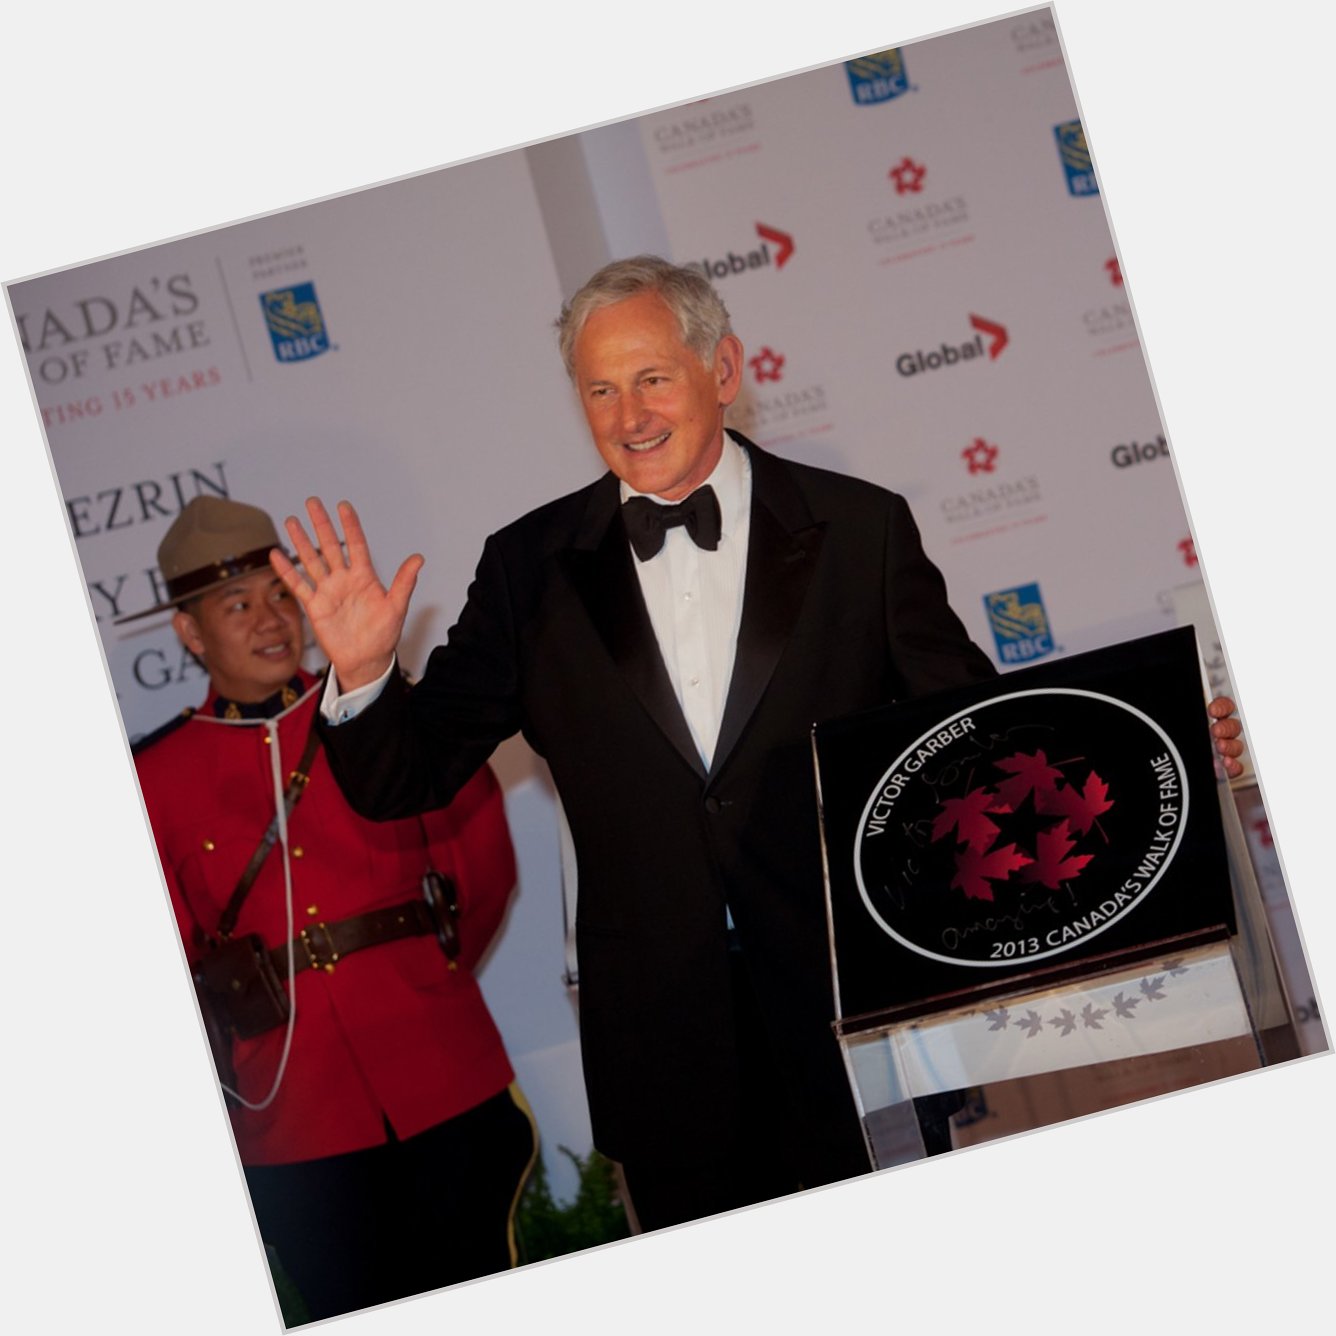 Join us in wishing 2013 Canada\s Walk of Fame Inductee Victor Garber a very happy birthday! 